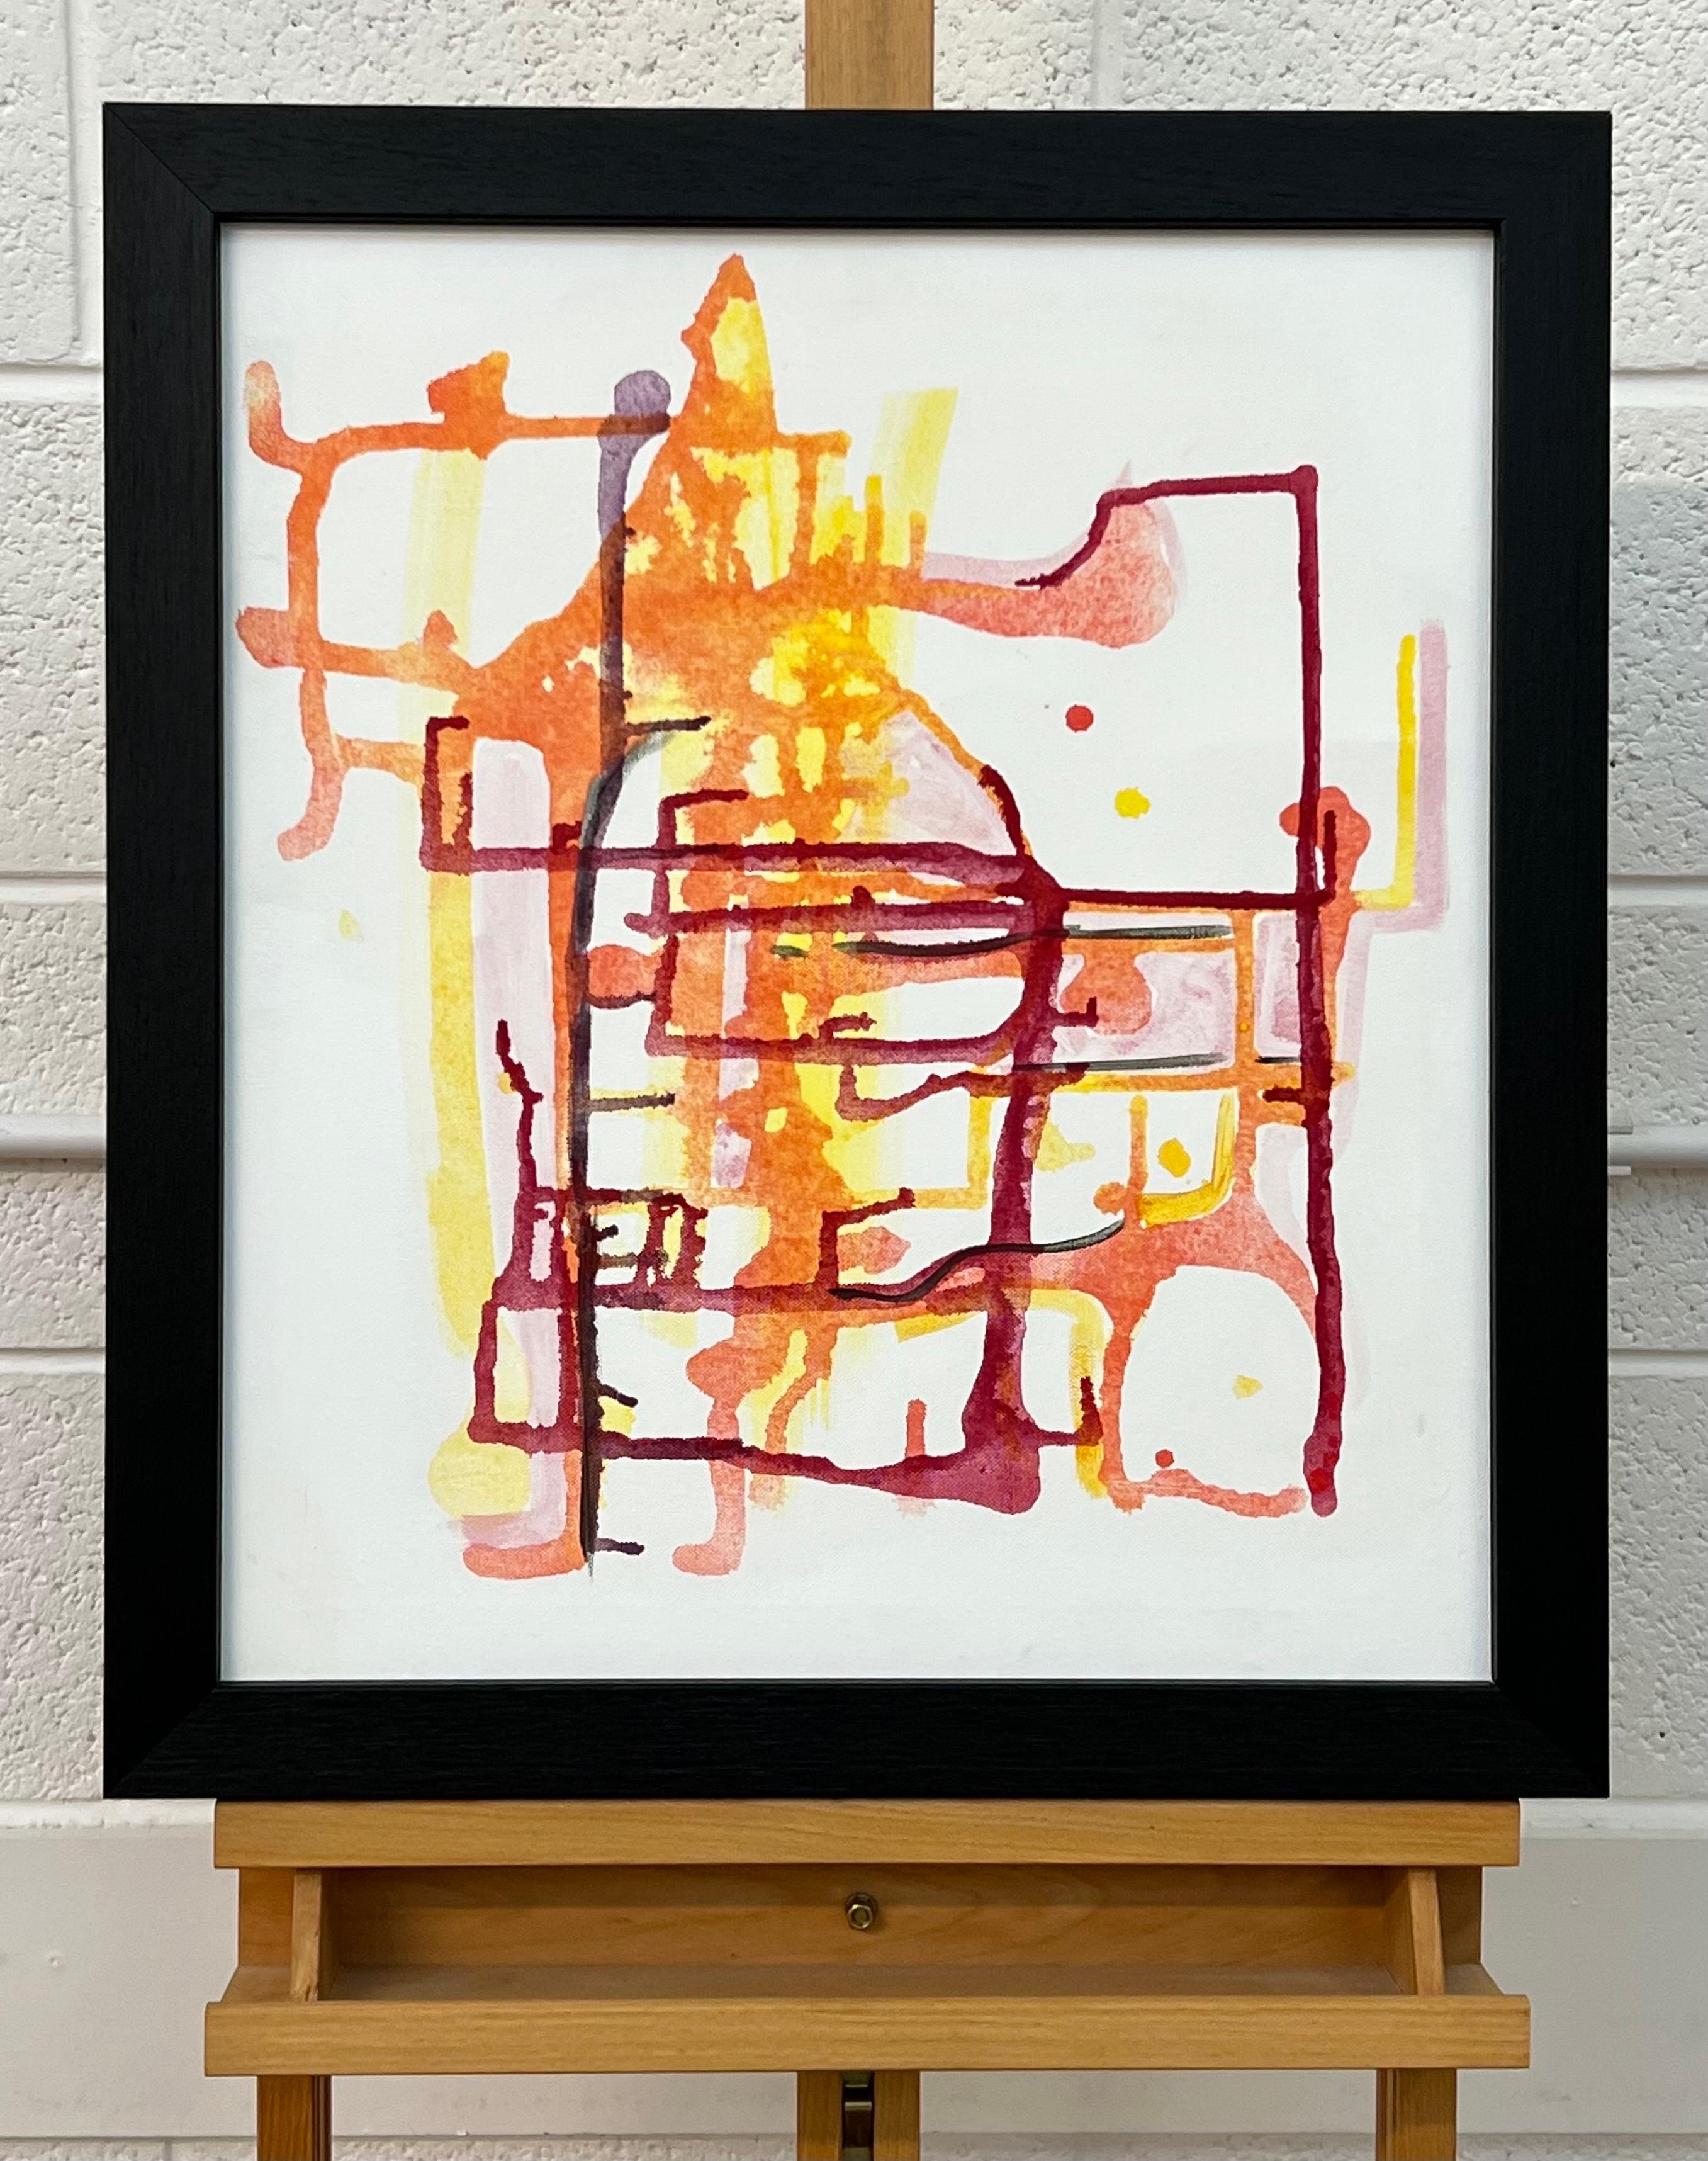 Early Abstract Painting Red Yellow Orange on White Background by British Artist For Sale 8